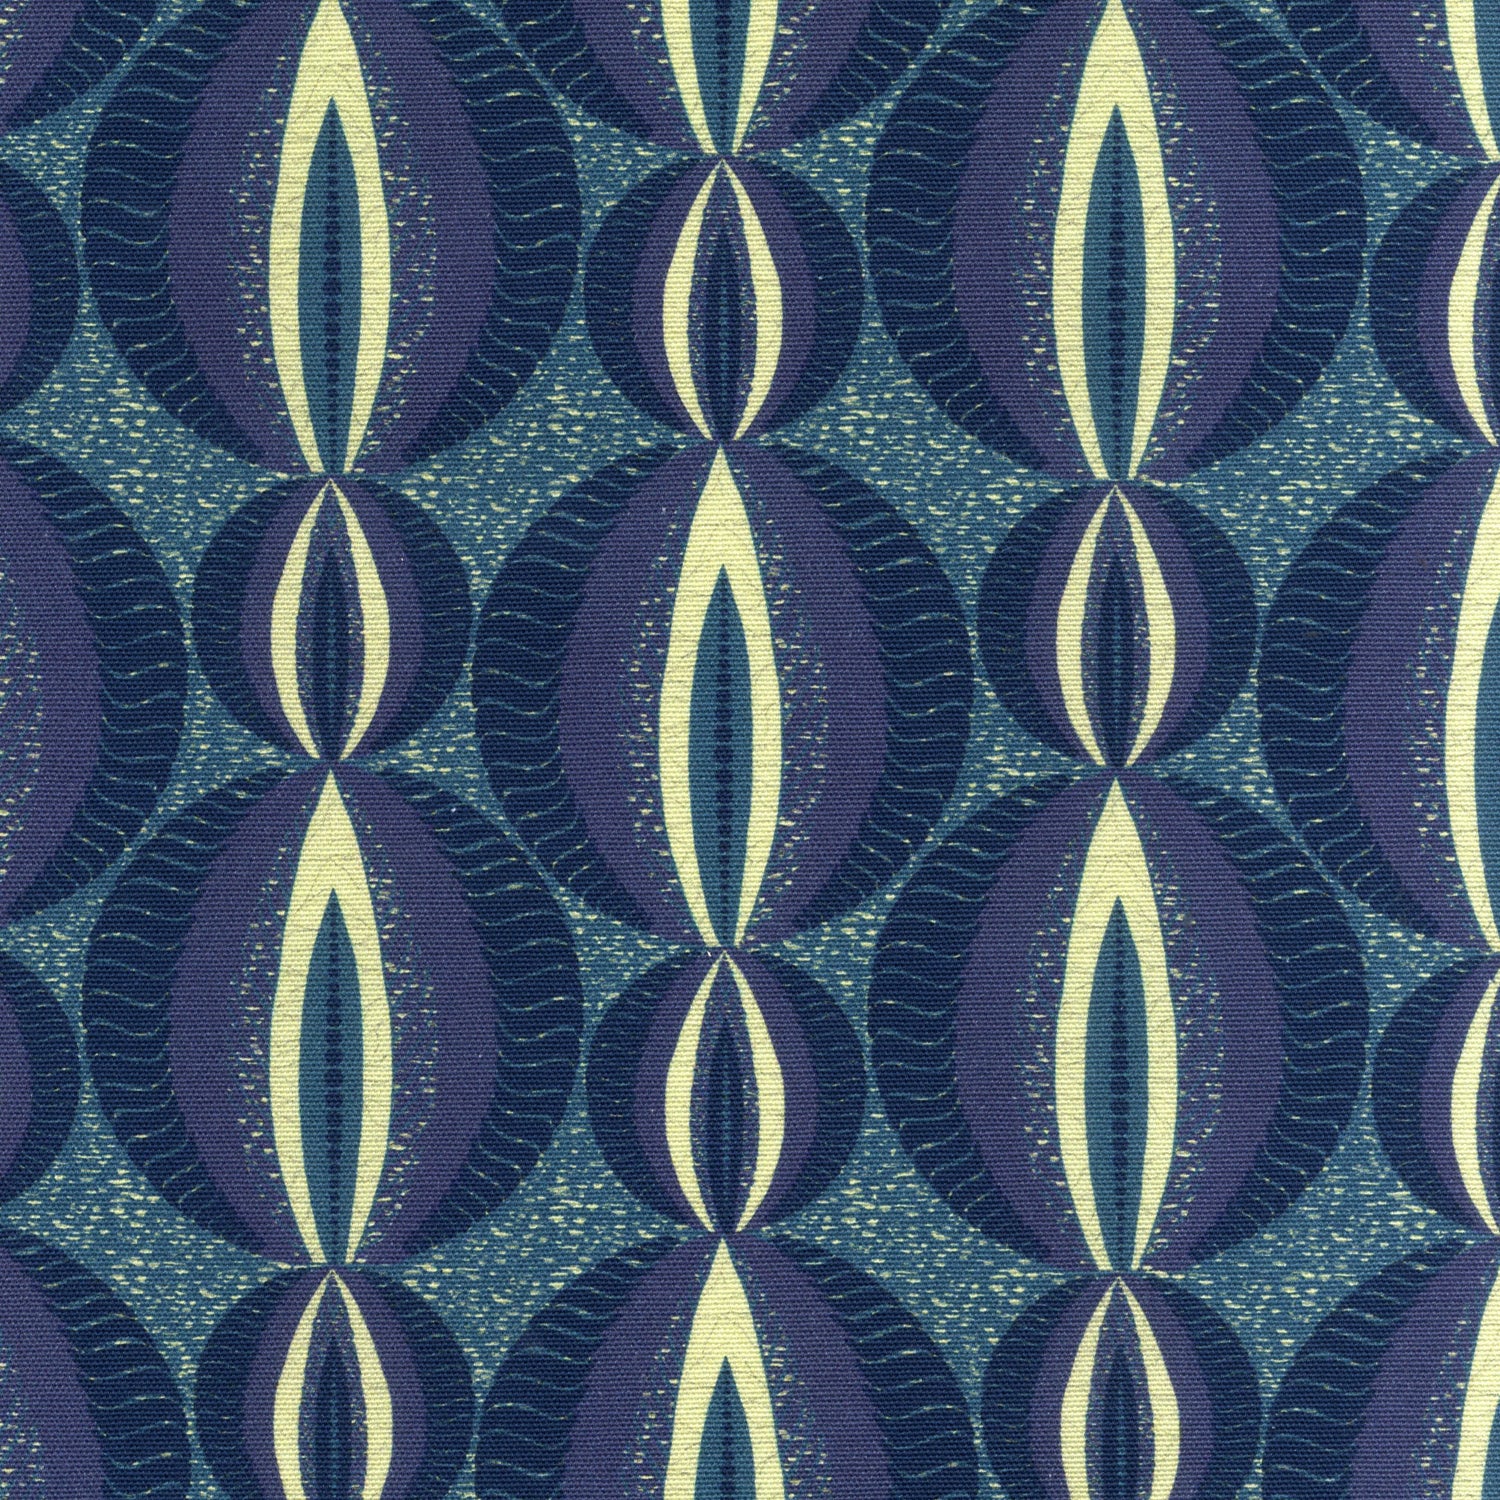 Detail of fabric in an interlocking circular stripe print in shades of navy and lime green on a navy field.